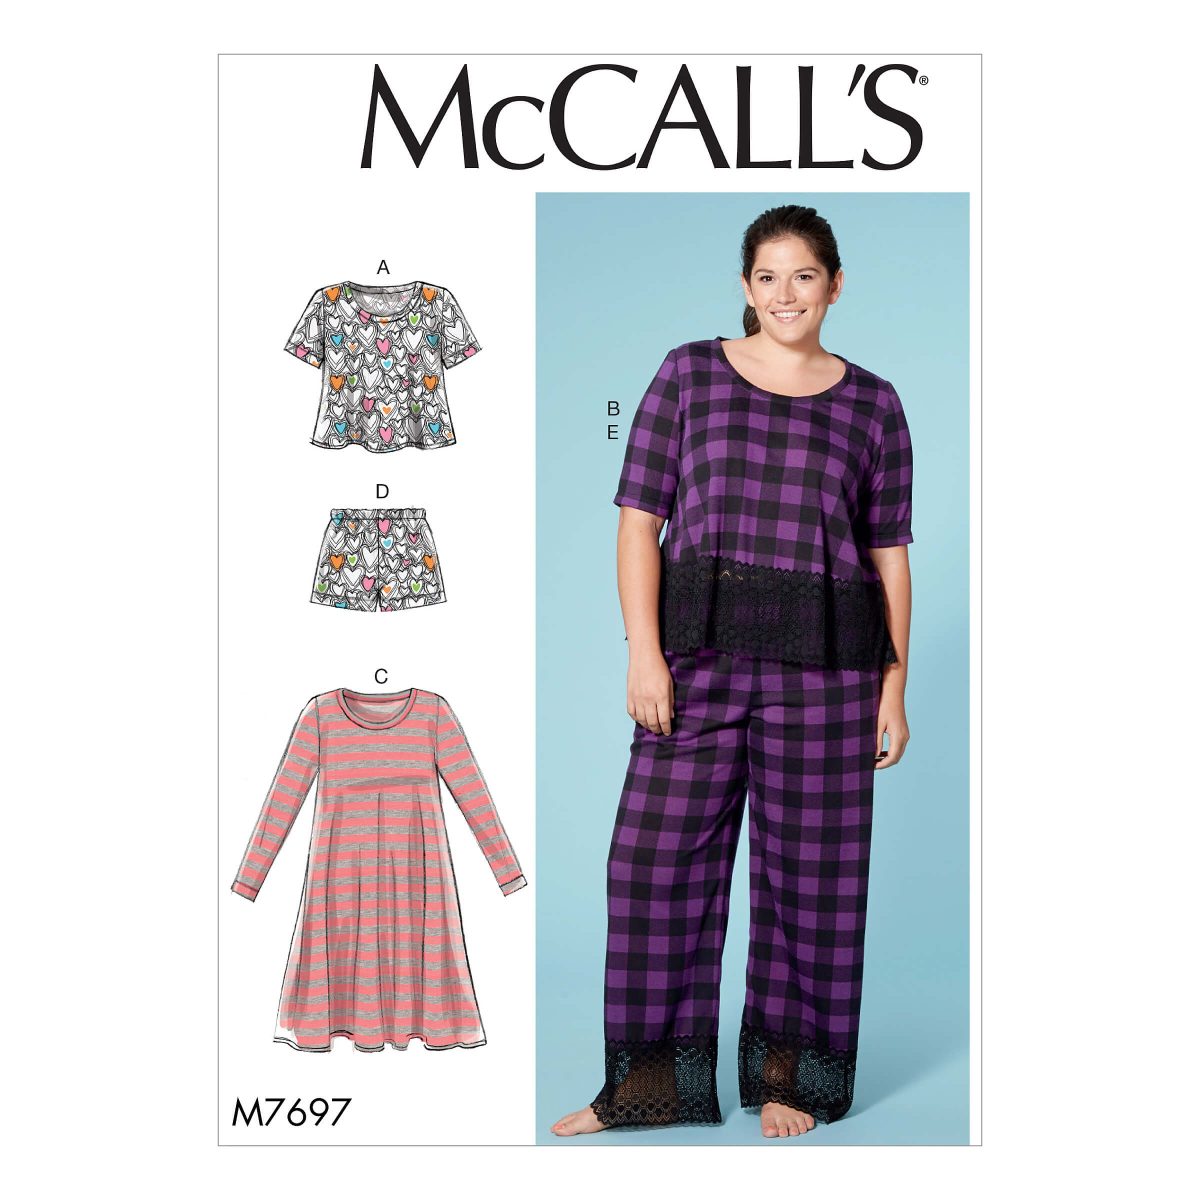 McCall's Sewing Pattern M7697 Misses'/Women's Lounge Tops, Dress, Shorts and Pants